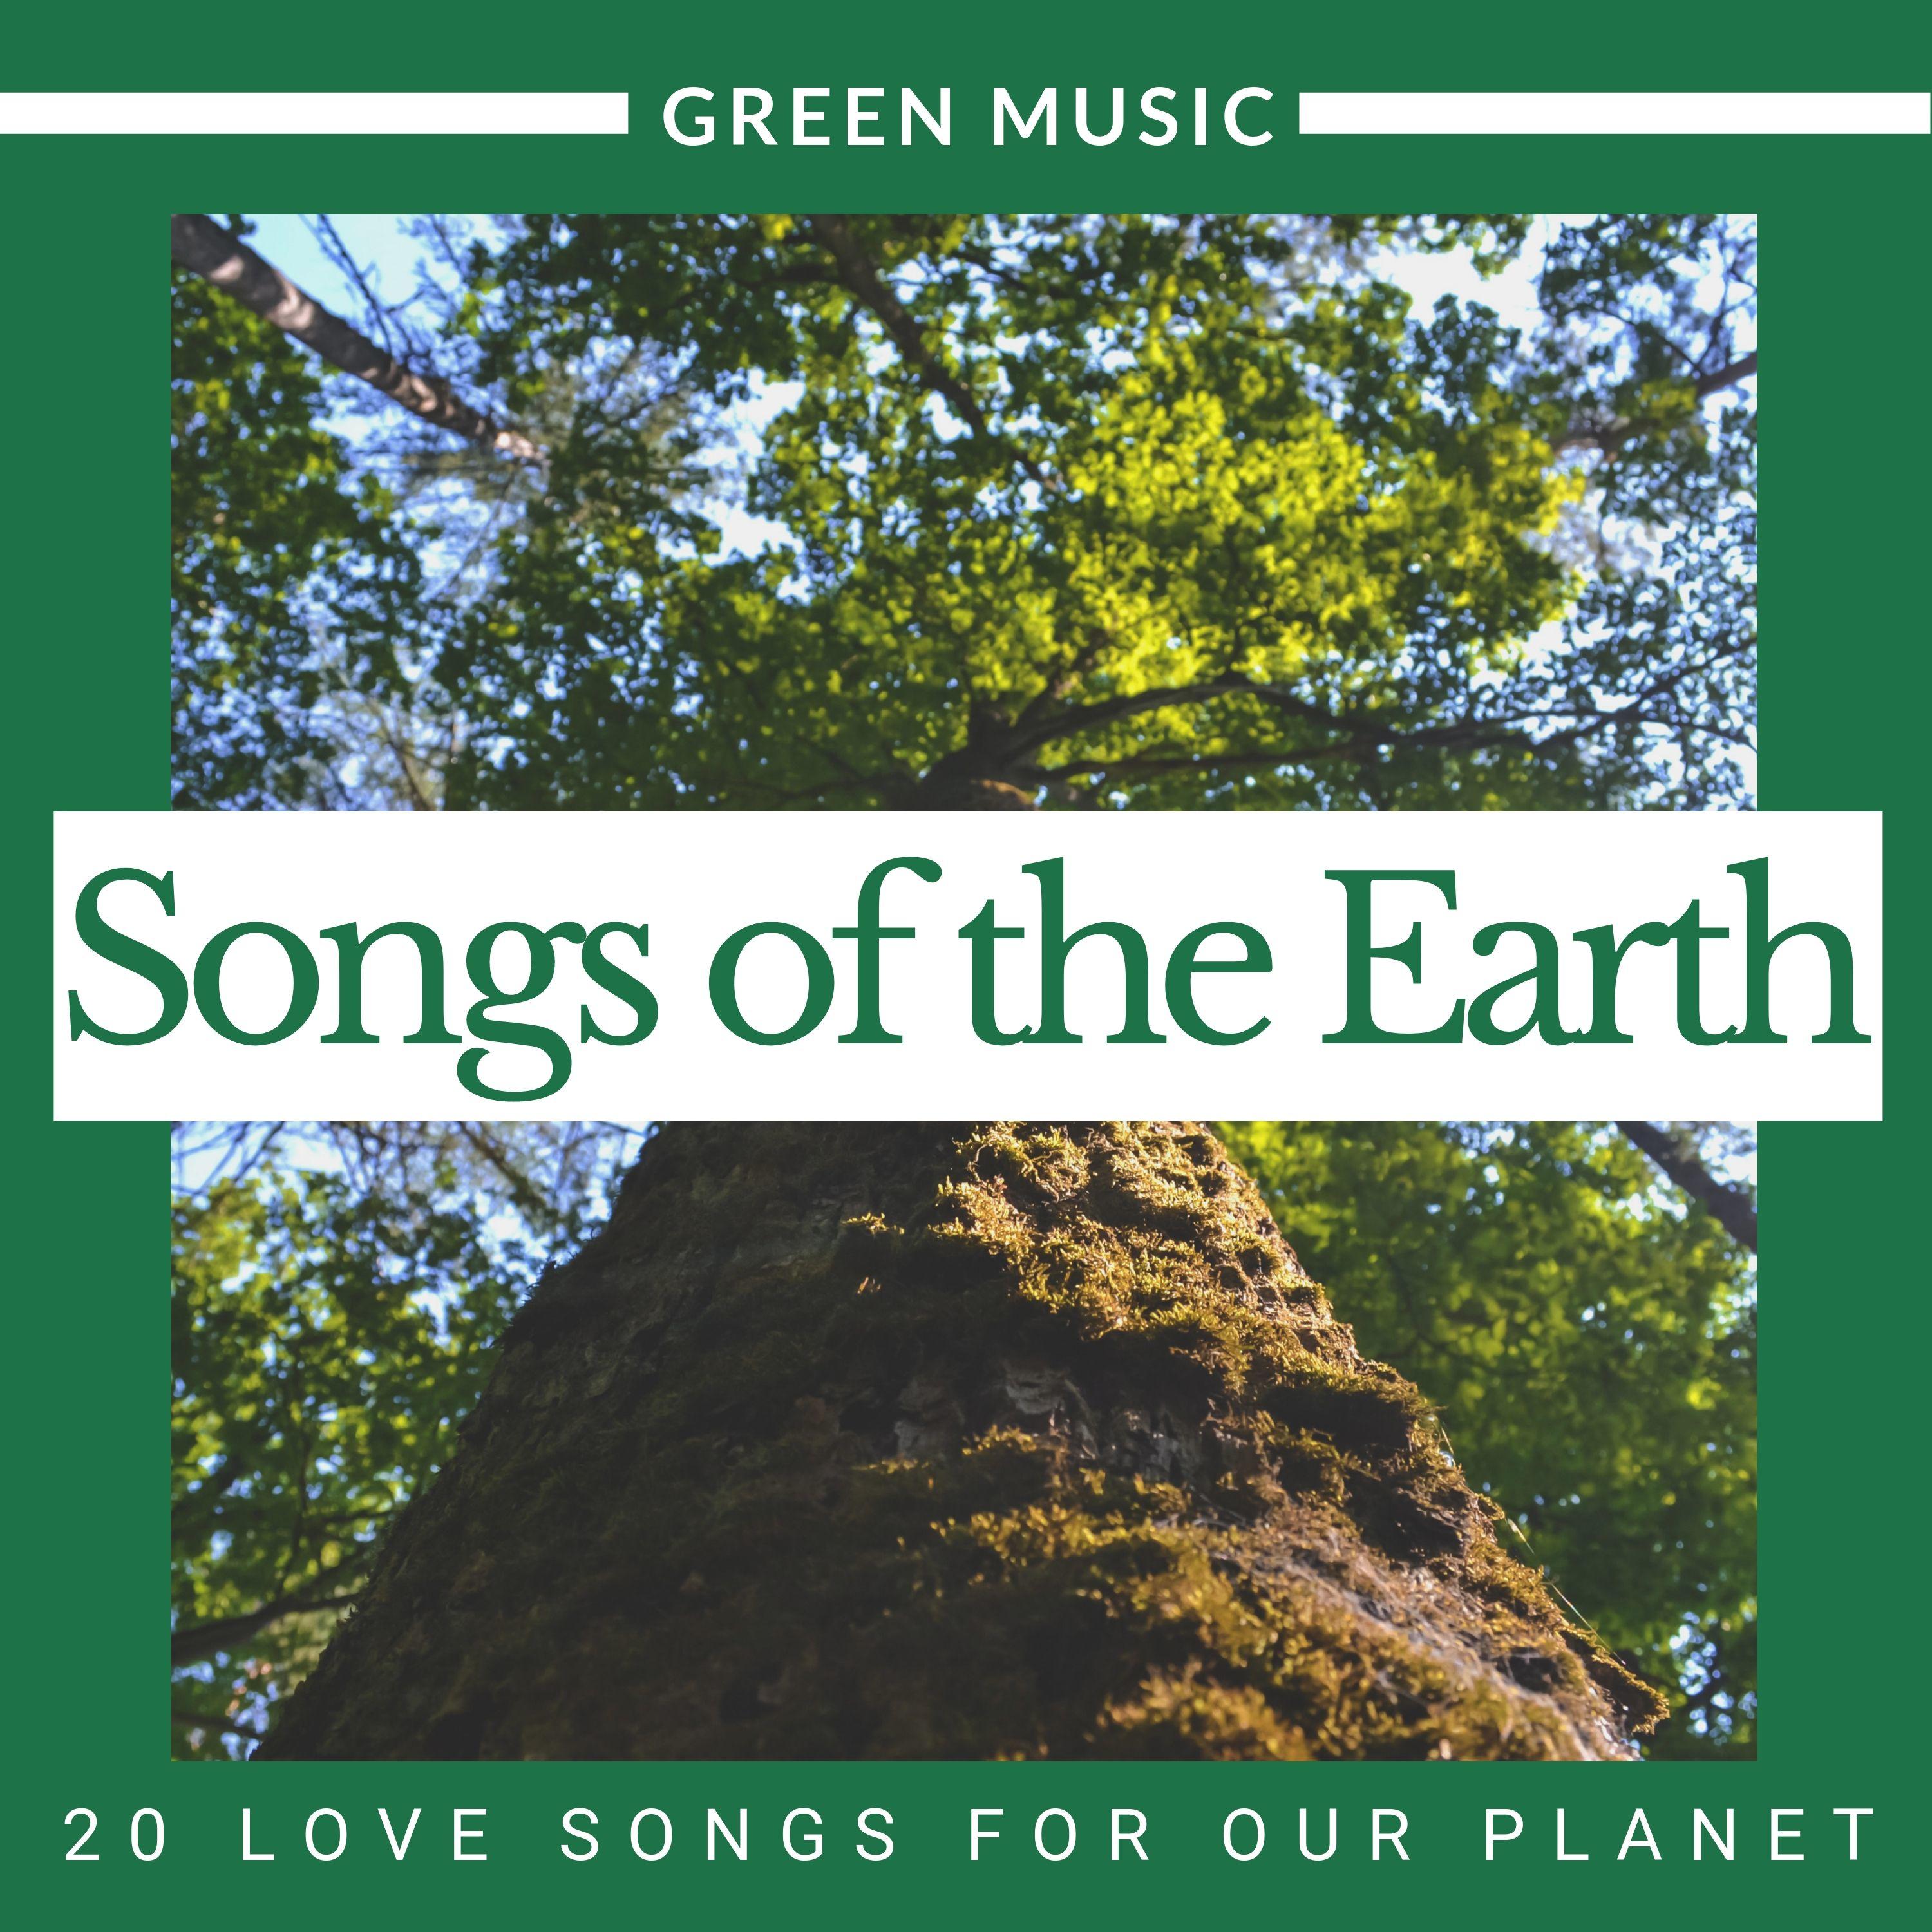 Songs of the Earth - 20 Love Songs for our Planet, Green Music